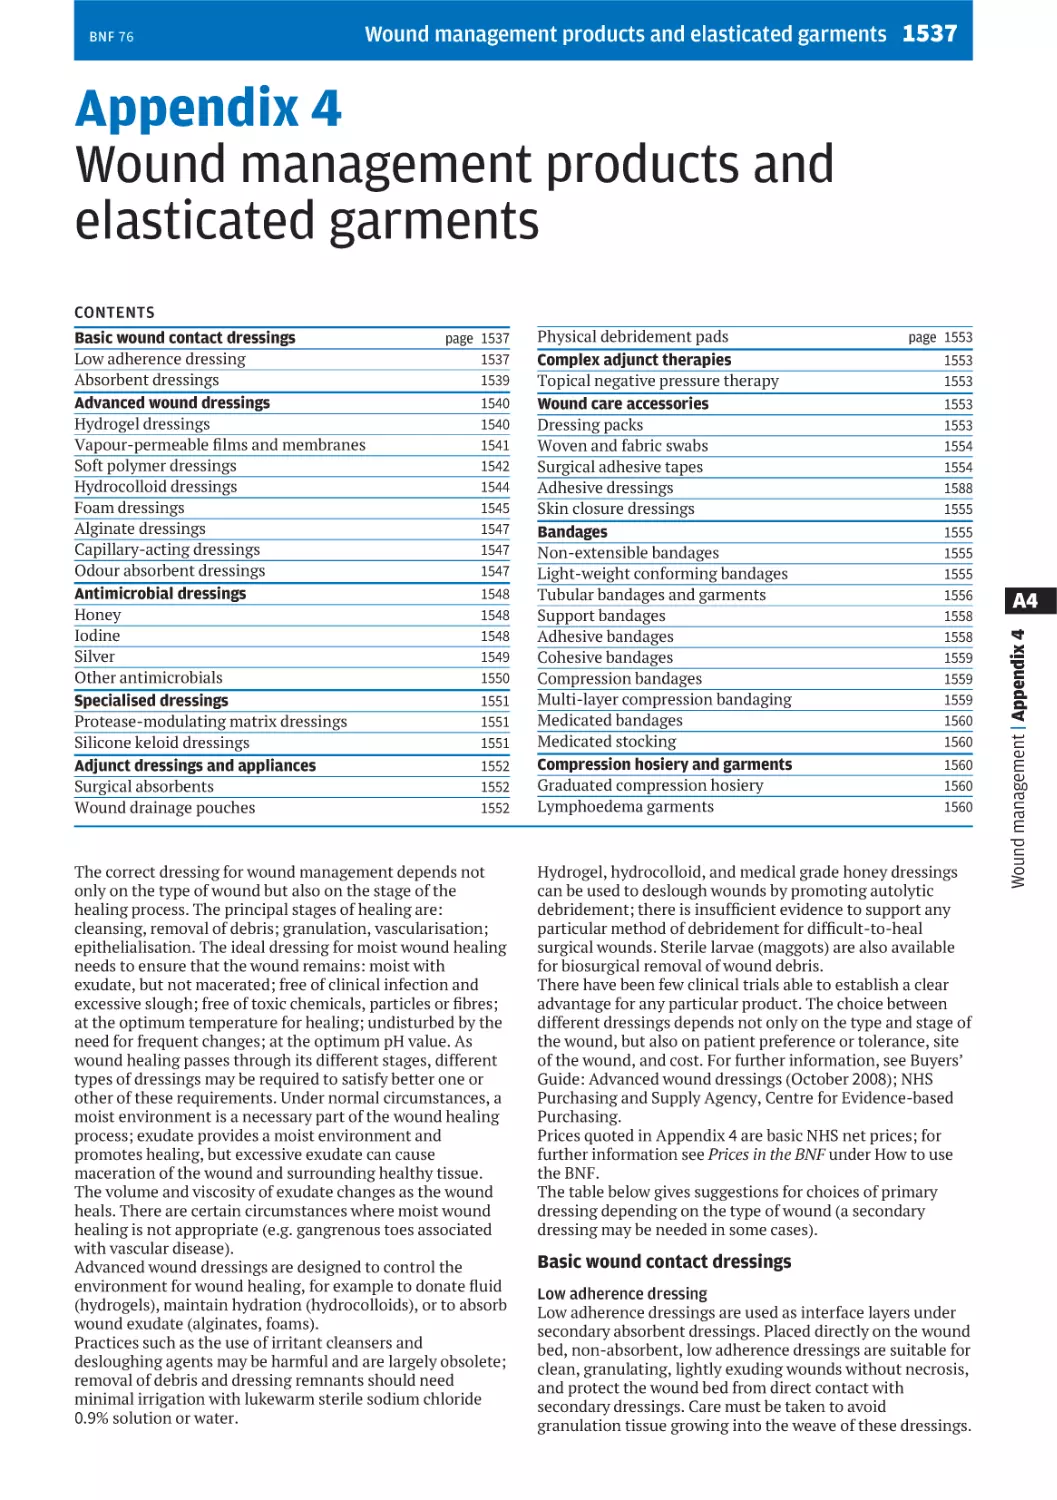 Appendix 4 Wound management products and elasticated garments